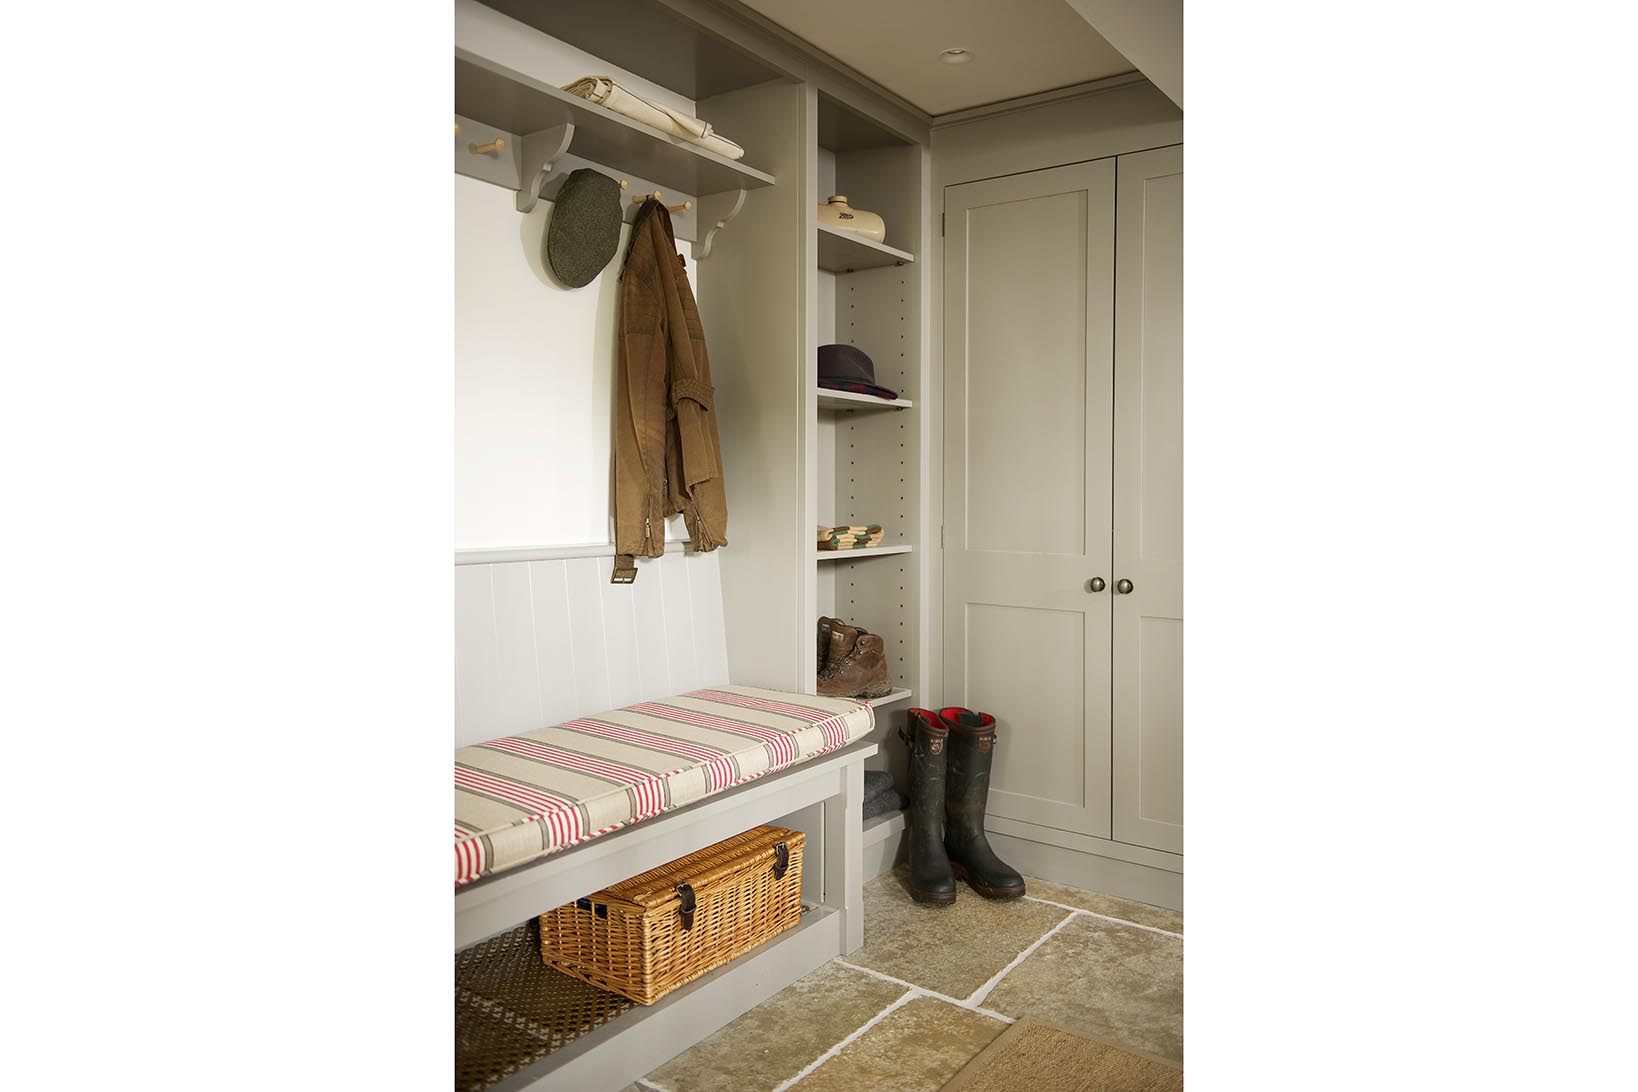 Bespoke handmade boot room with open shelves and shaker pegs on a bracketed shelf and a bench all hand painted in grey.